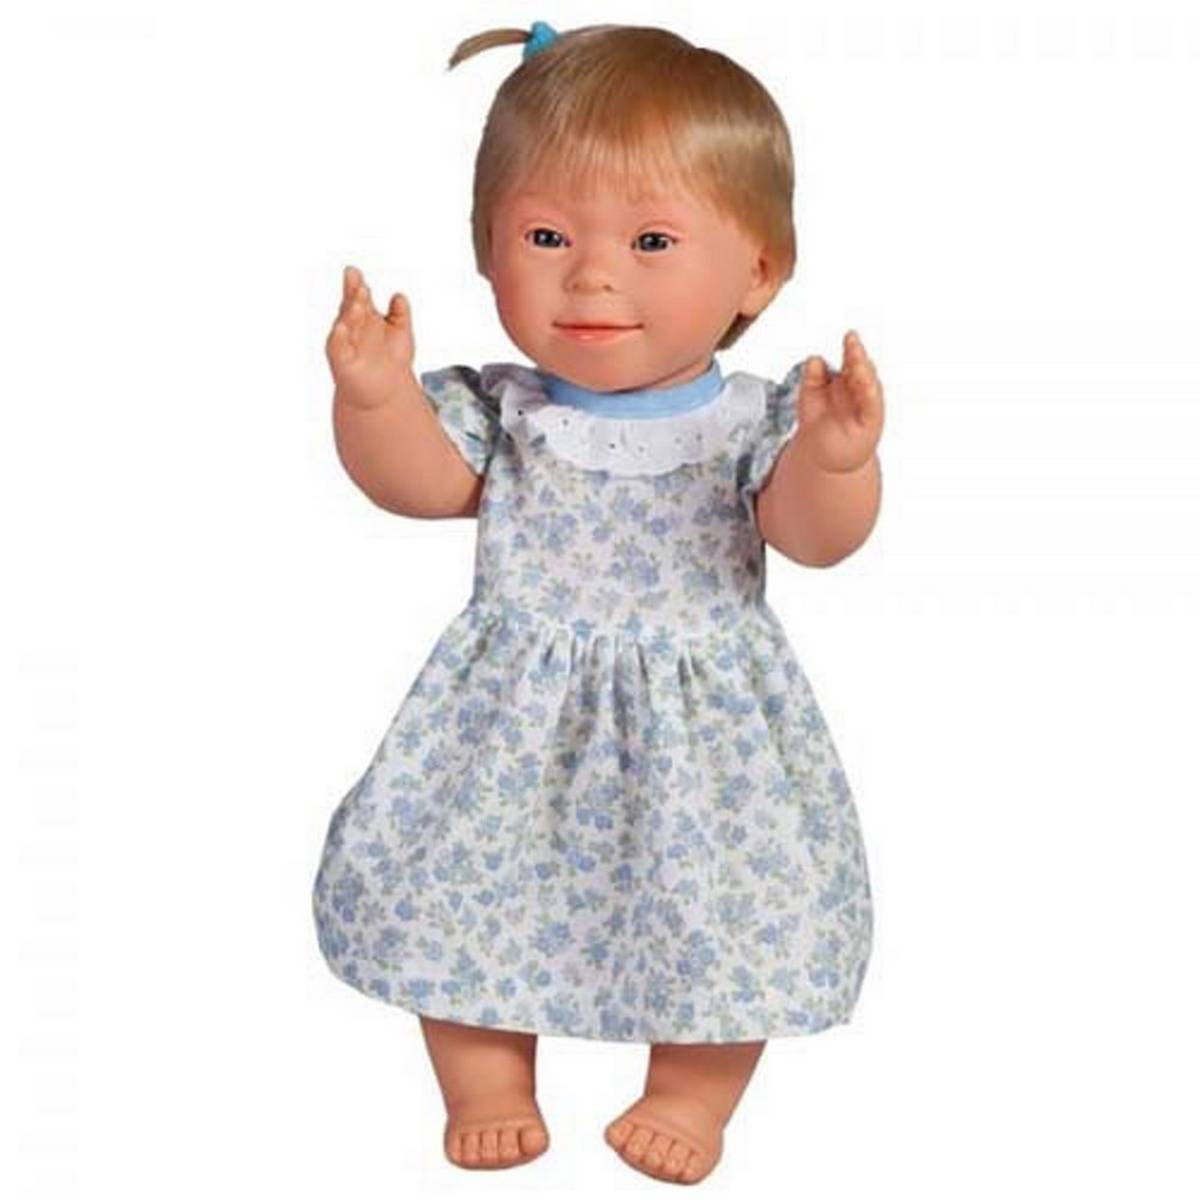 Doll with Downs Syndrome – Girl Blonde Hair – ABC School Supplies